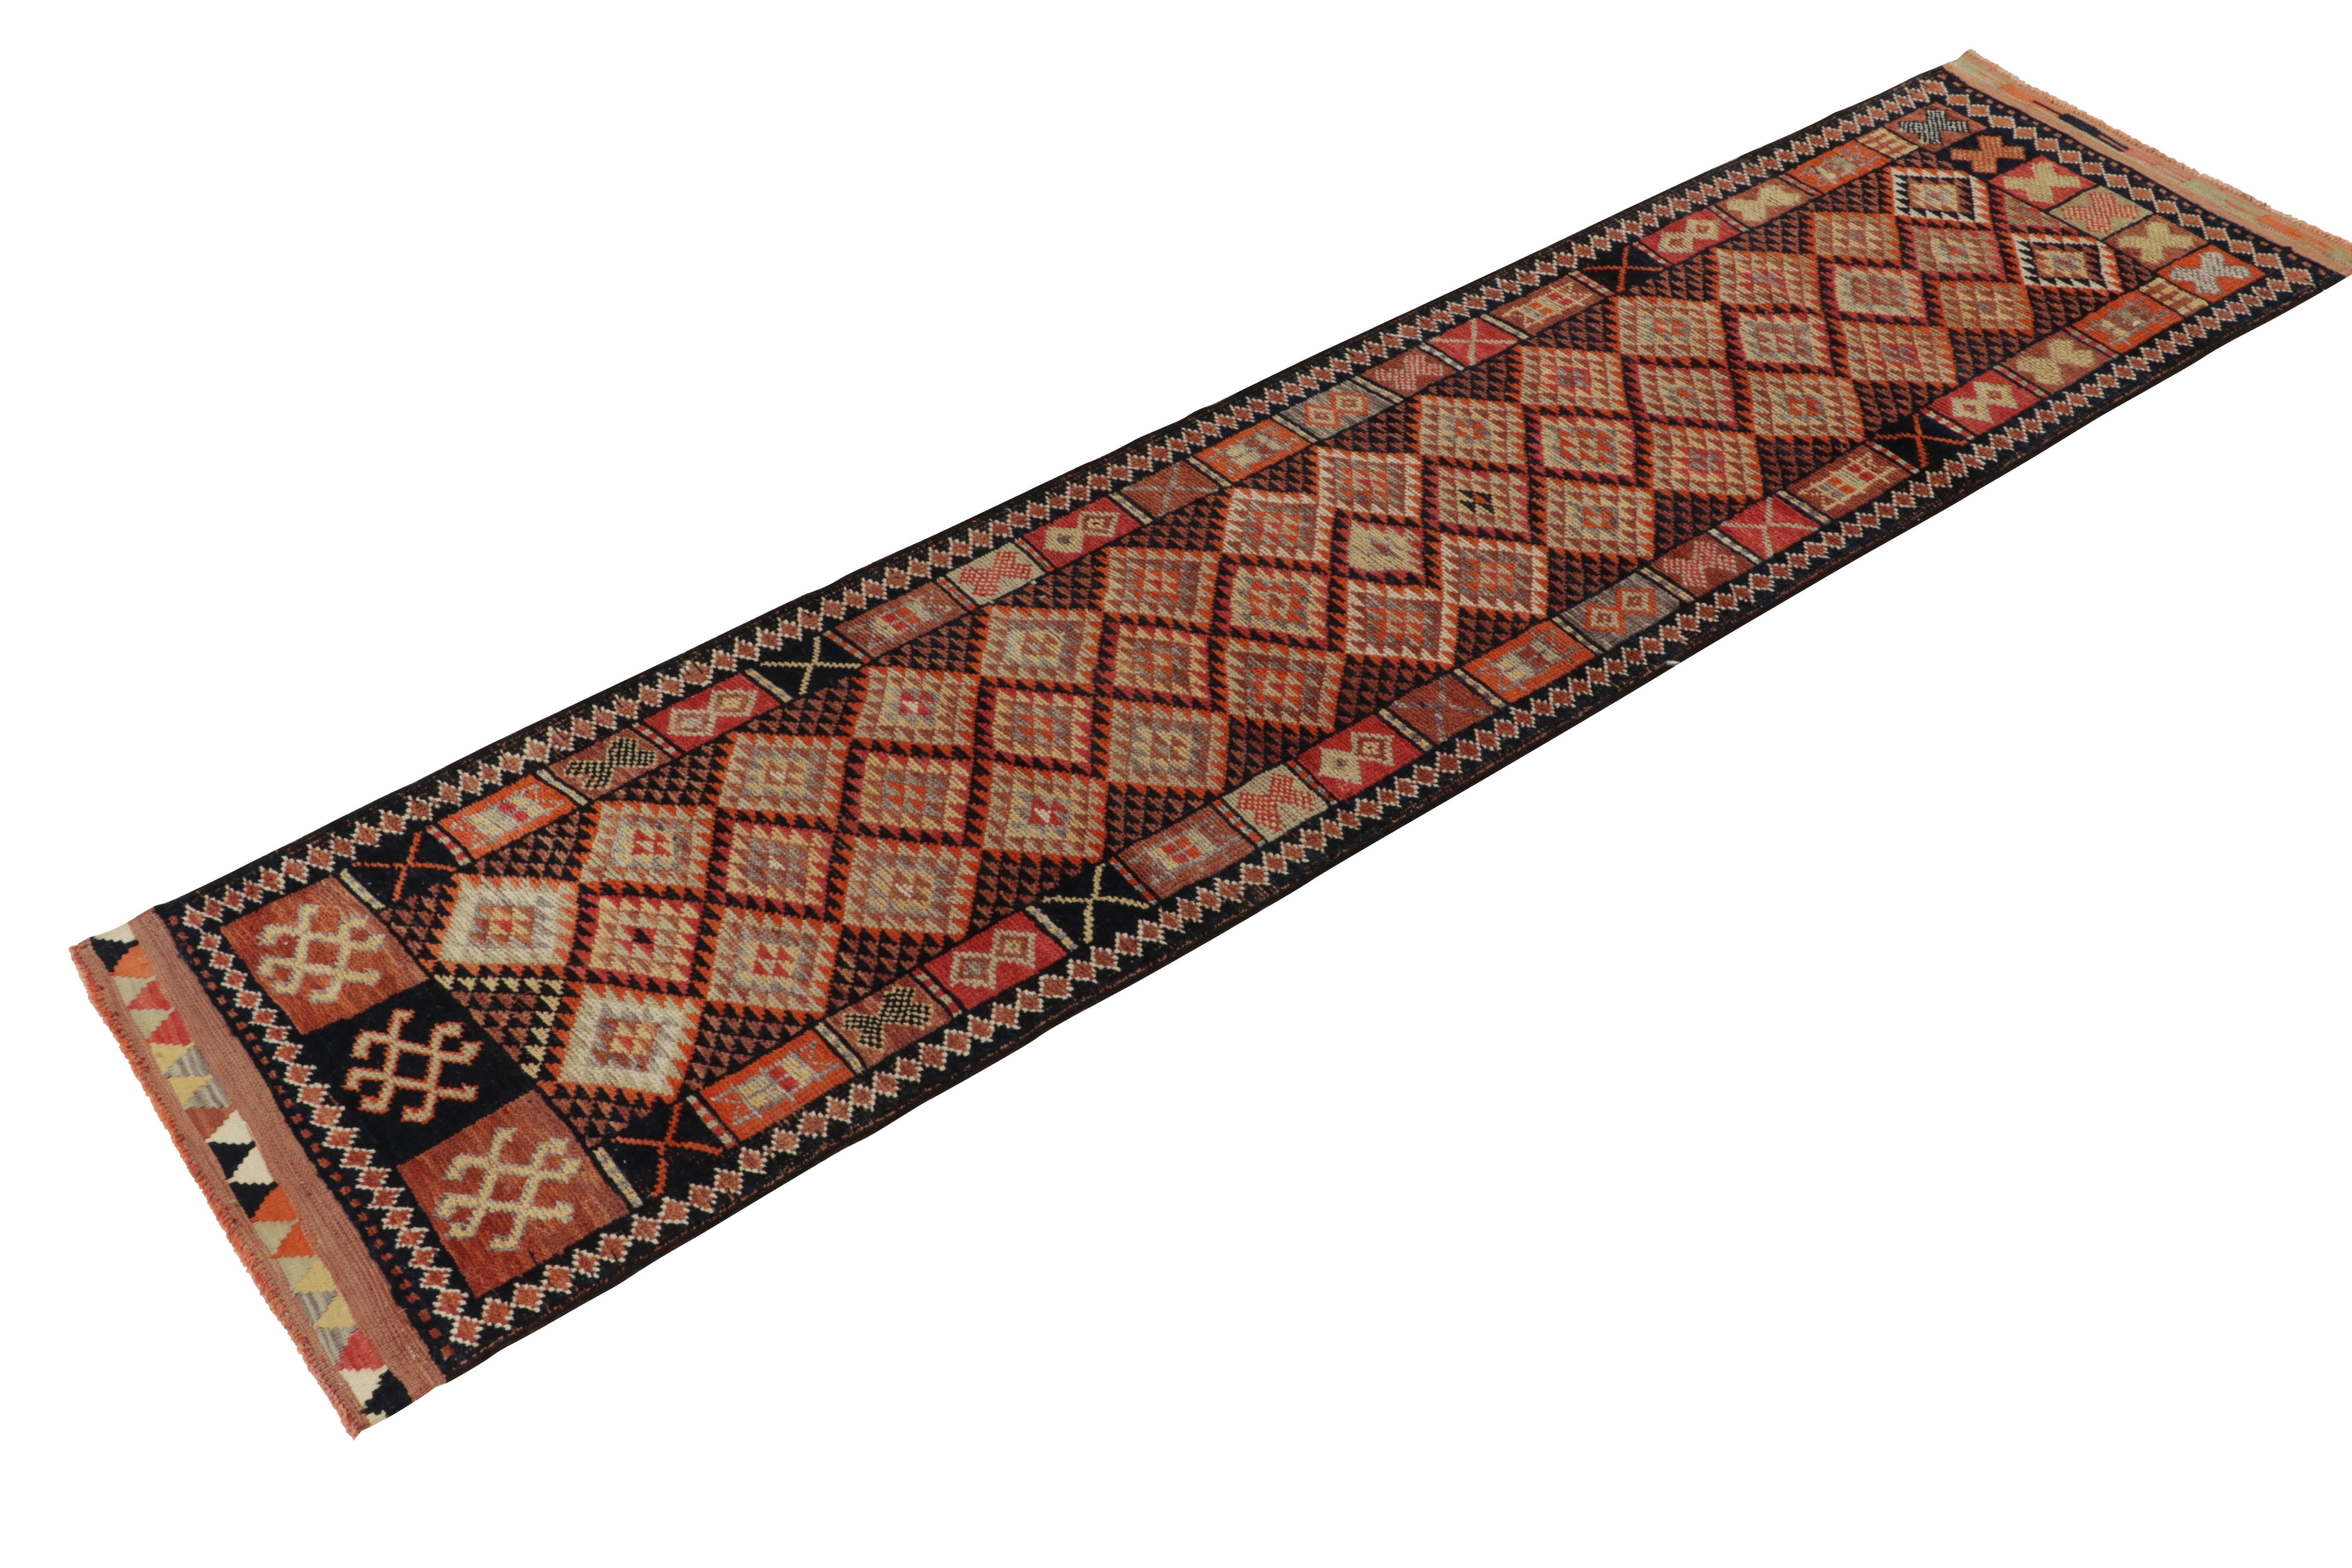 From R&K Principal Josh Nazmiyal’s latest acquisitions, a distinct vintage runner originating from Turkey circa 1950-1960. 

On the Design: The symmetric geometric design features traditional motifs encased in diamond patterns continuing from end to